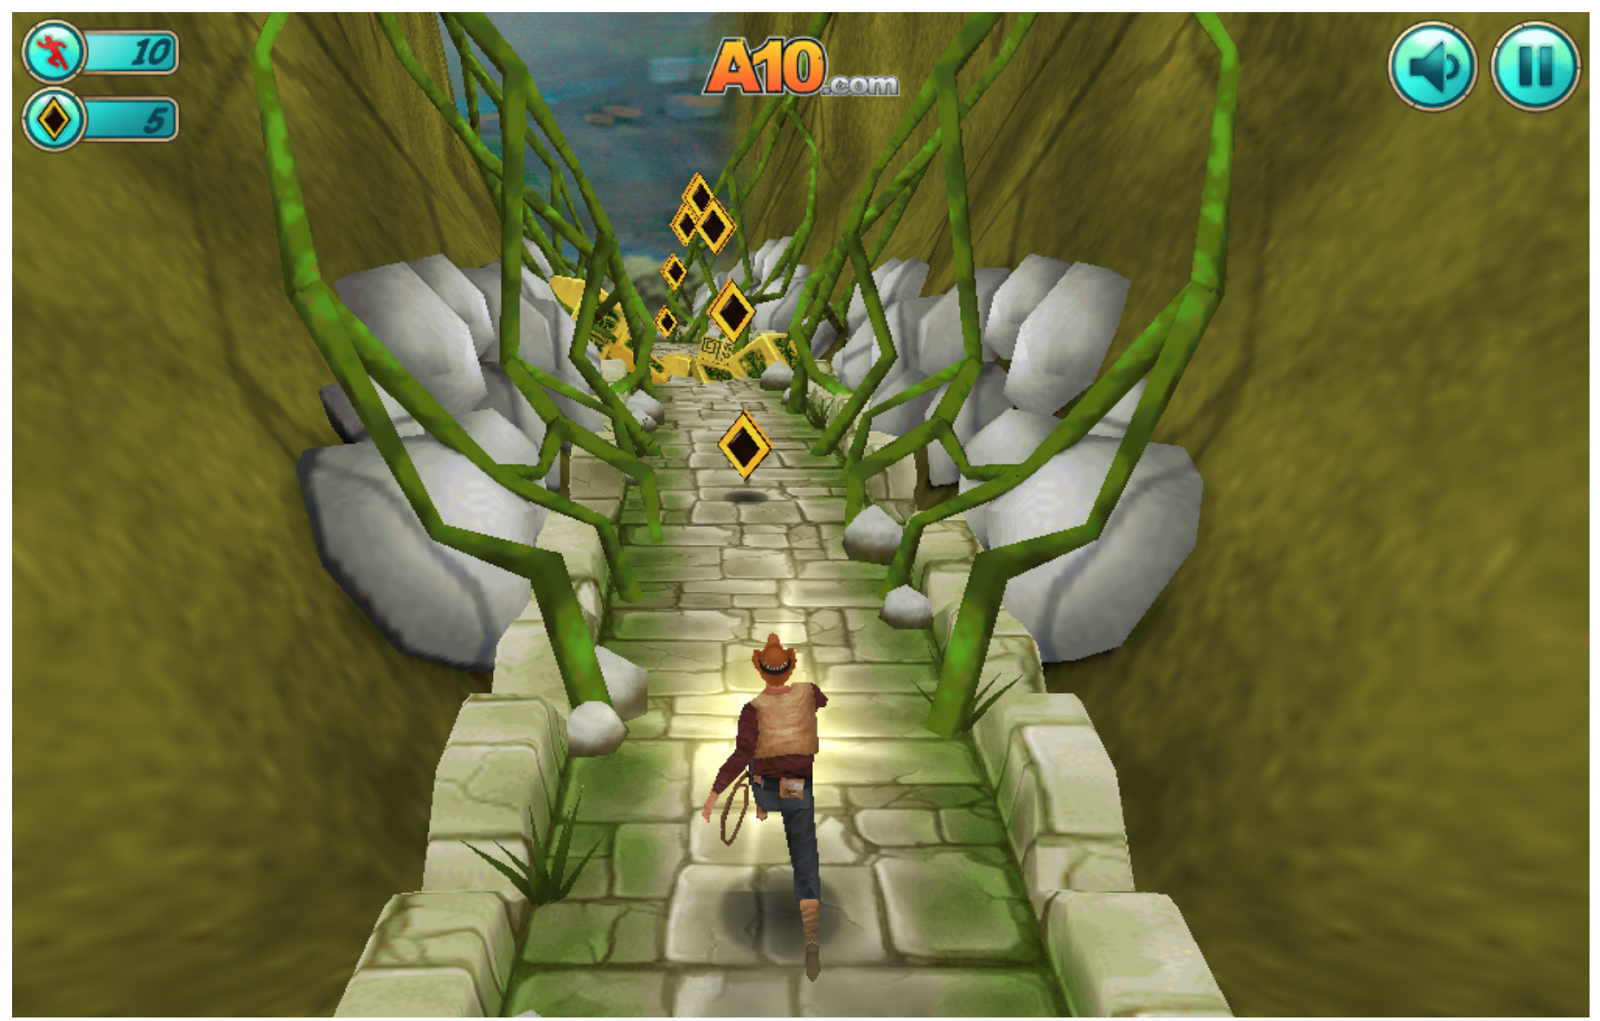 Temple Run 2 TRICKR DASH CHALLENGE: Infinite Runner Game 3D Playing PC 